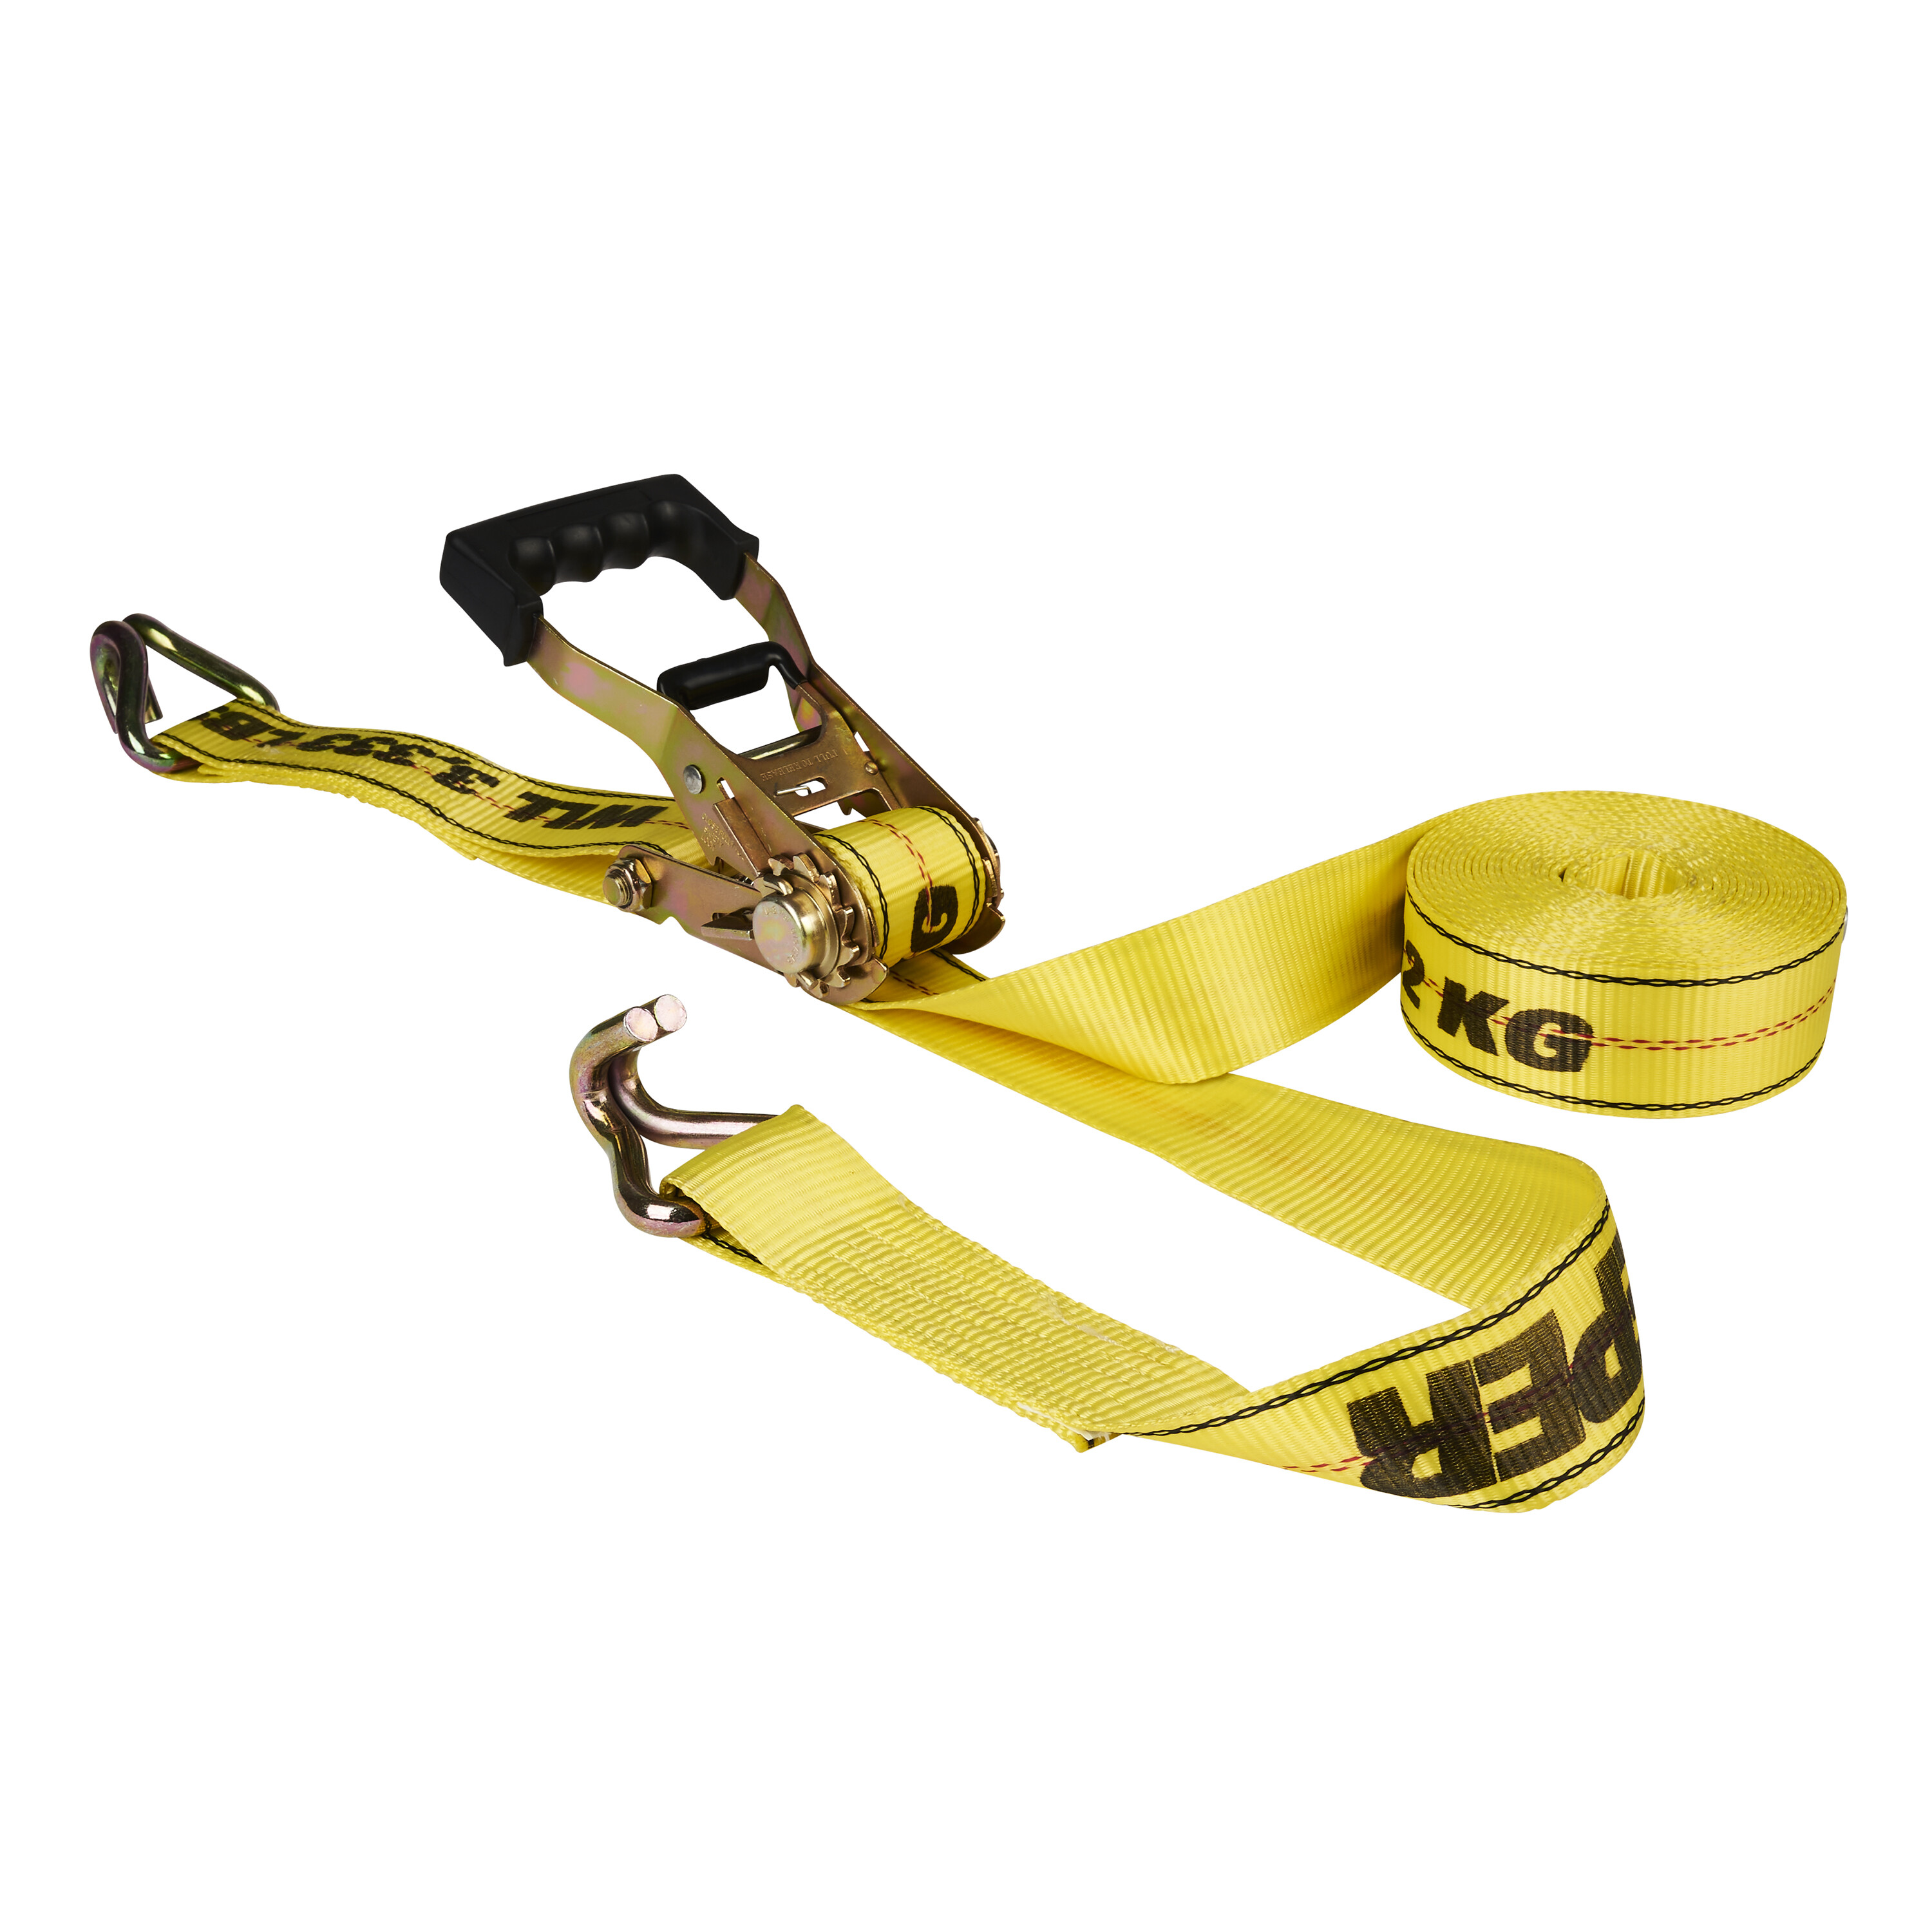 2 x 27' EZ Release Ratchet Tie-Down with Double J-Hooks — Keeper